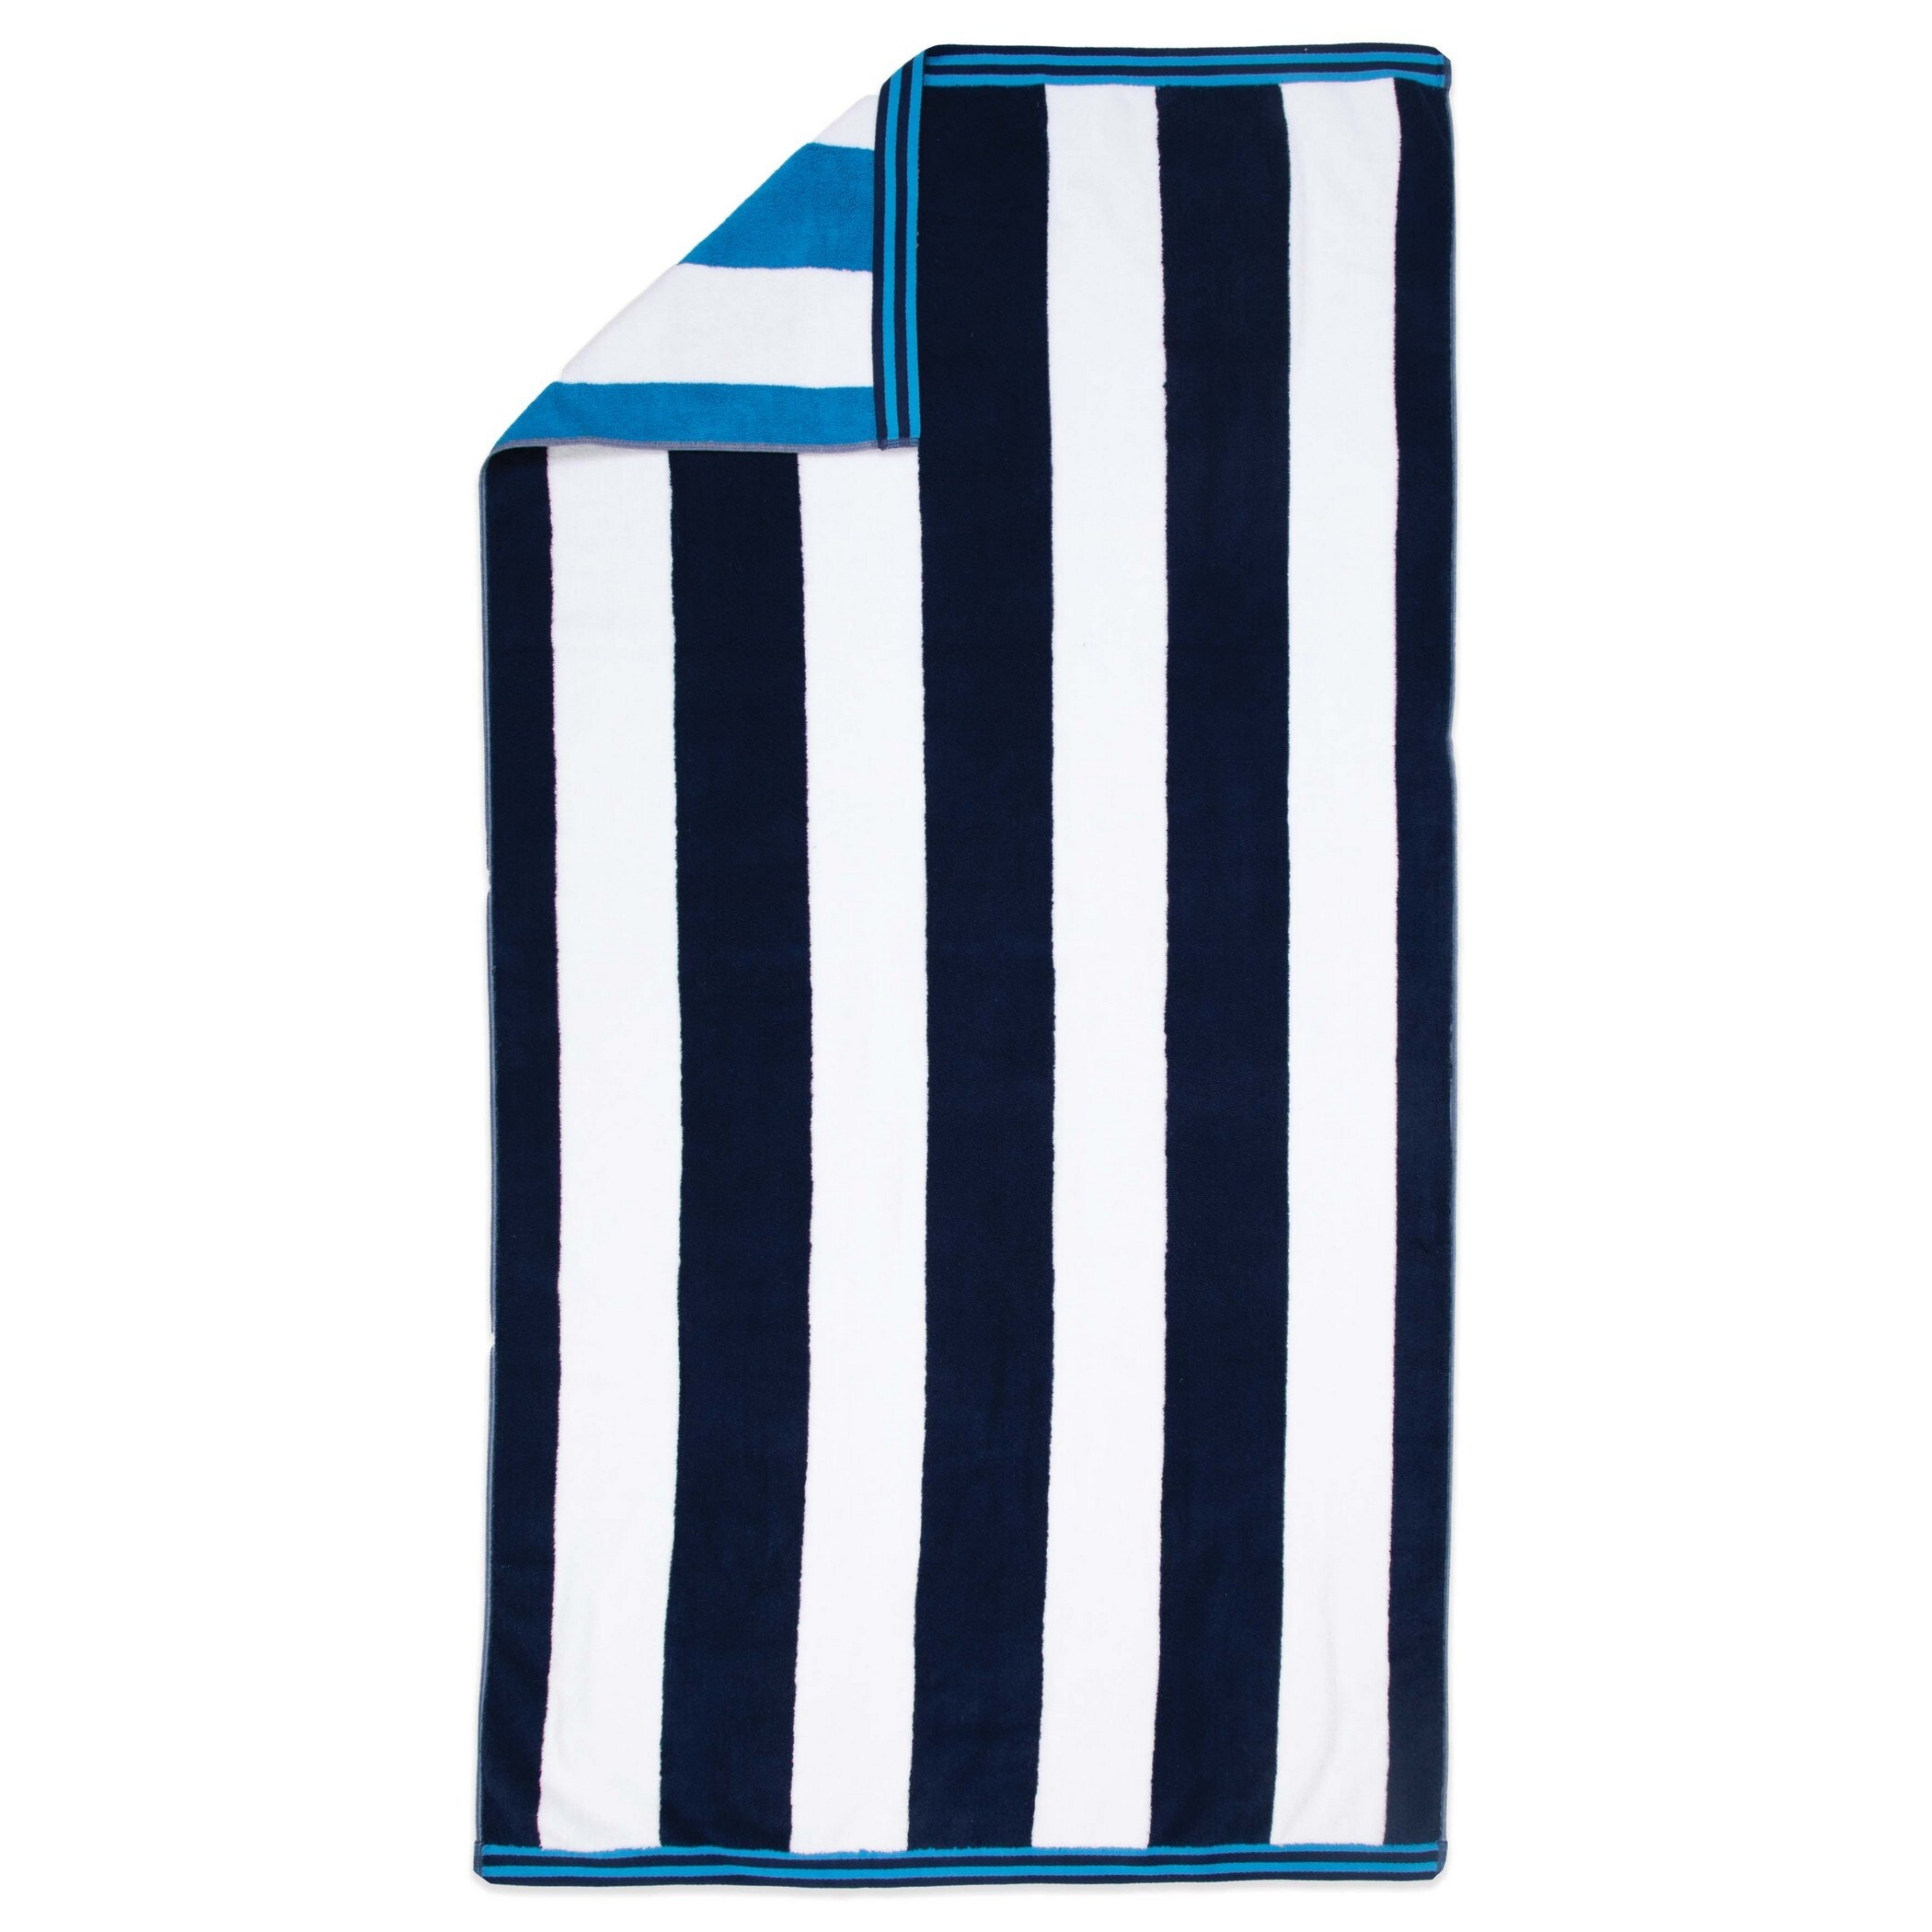 Aston and Arden Striped Reversible Oversized Thick Beach Towel (35x70